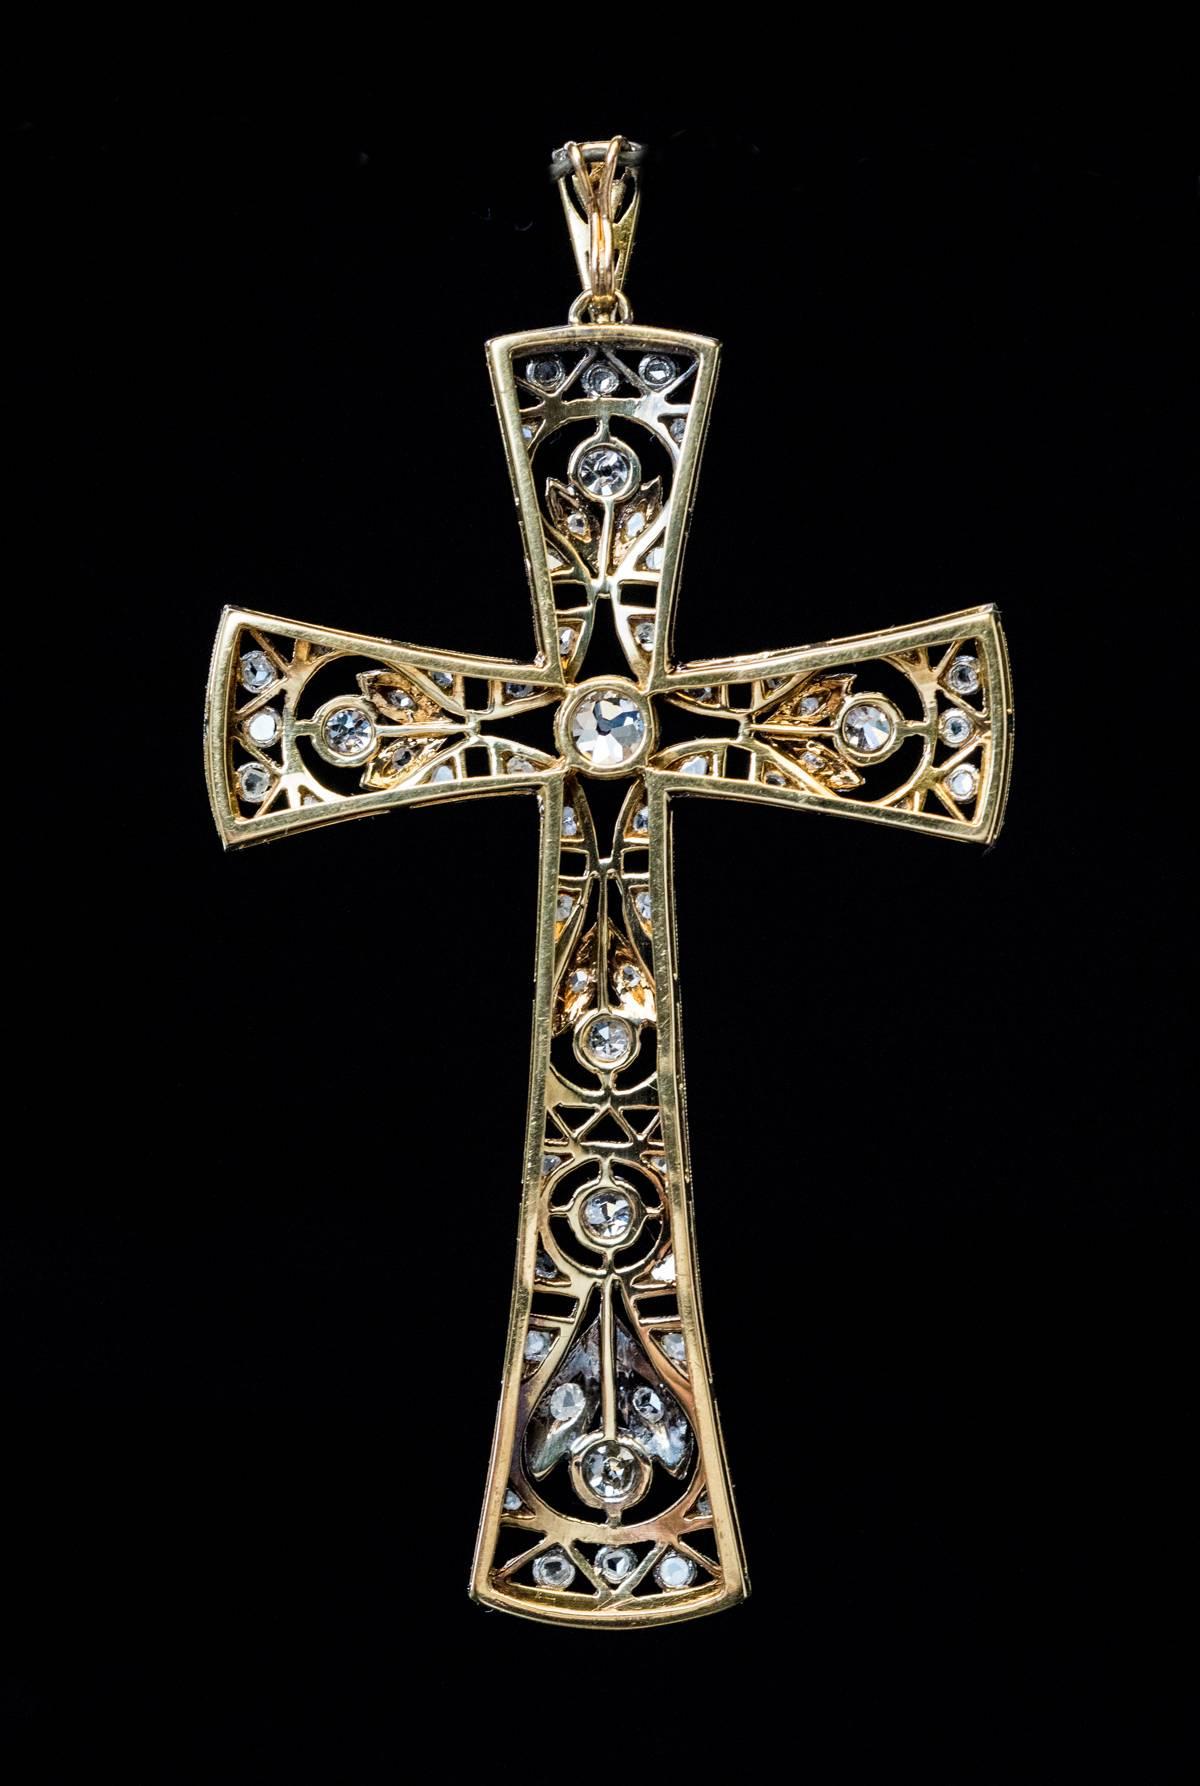 Circa 1905
This large antique cross pendant from Edwardian era is embellished with garland-motif openwork designs.  The cross is set with old mine brilliant and rose cut diamonds.
Estimated total diamond weight is 1.30 ct.
Total length with bail is